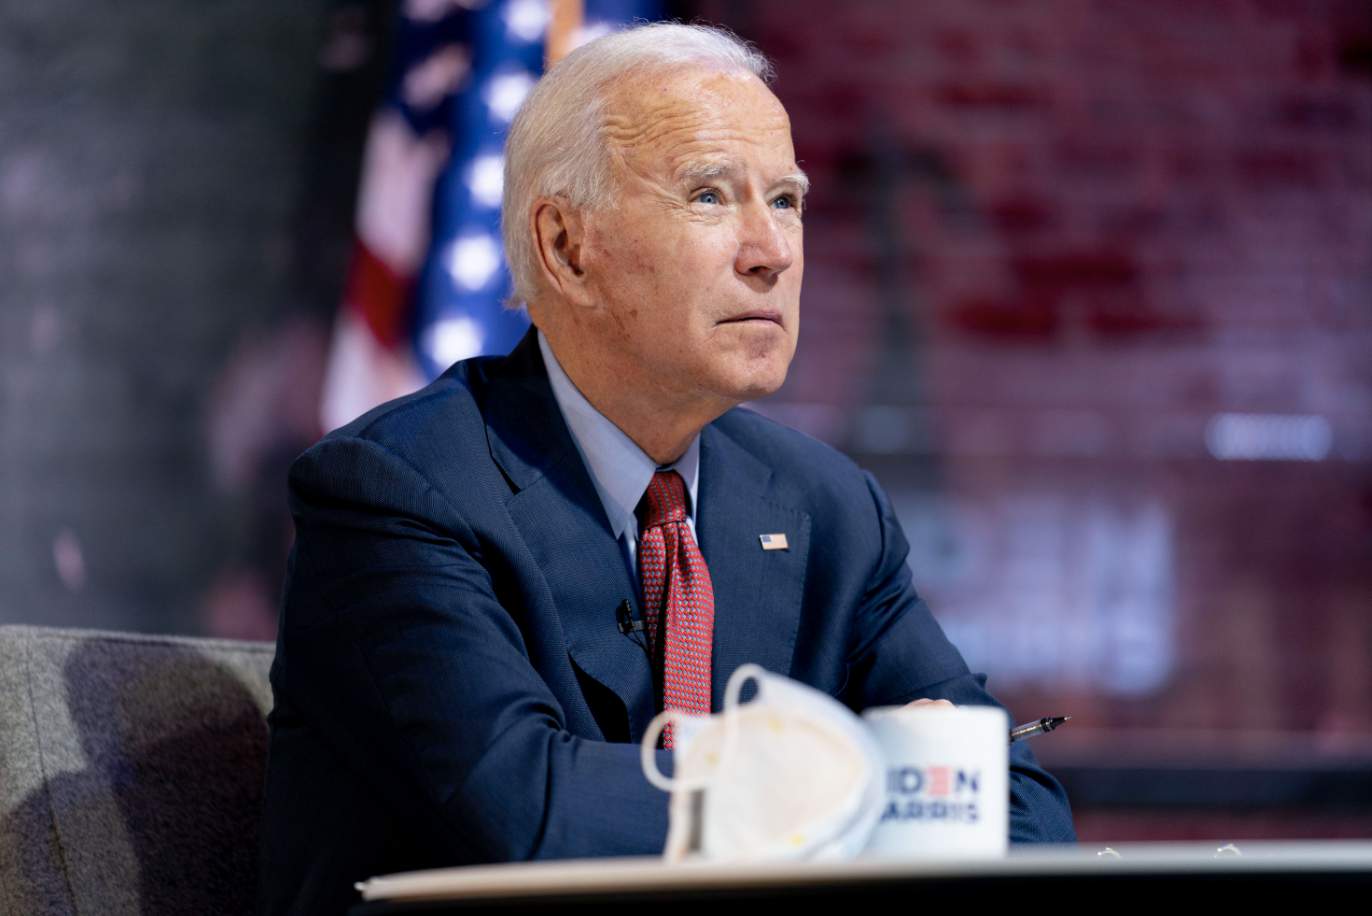 Biden vows not to make ‘false promises’ about pandemic